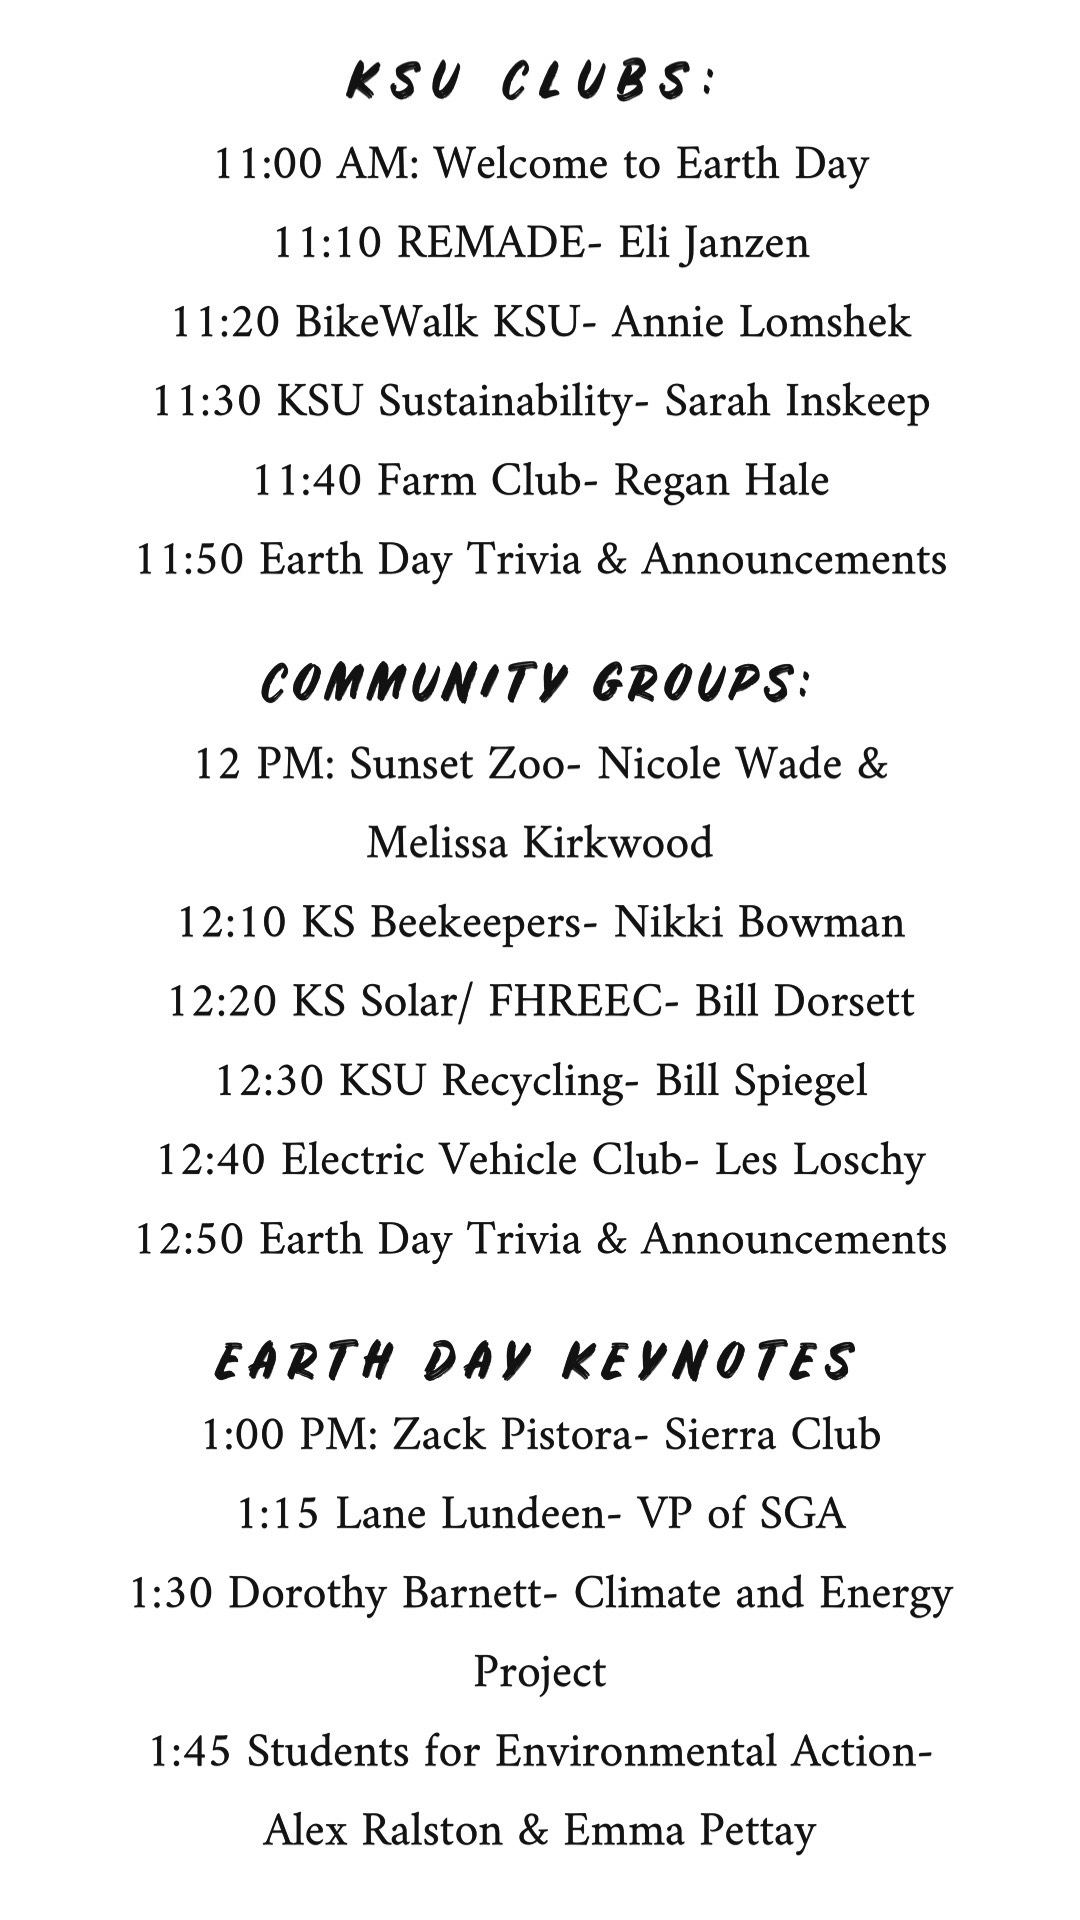 Earth Day Schedule